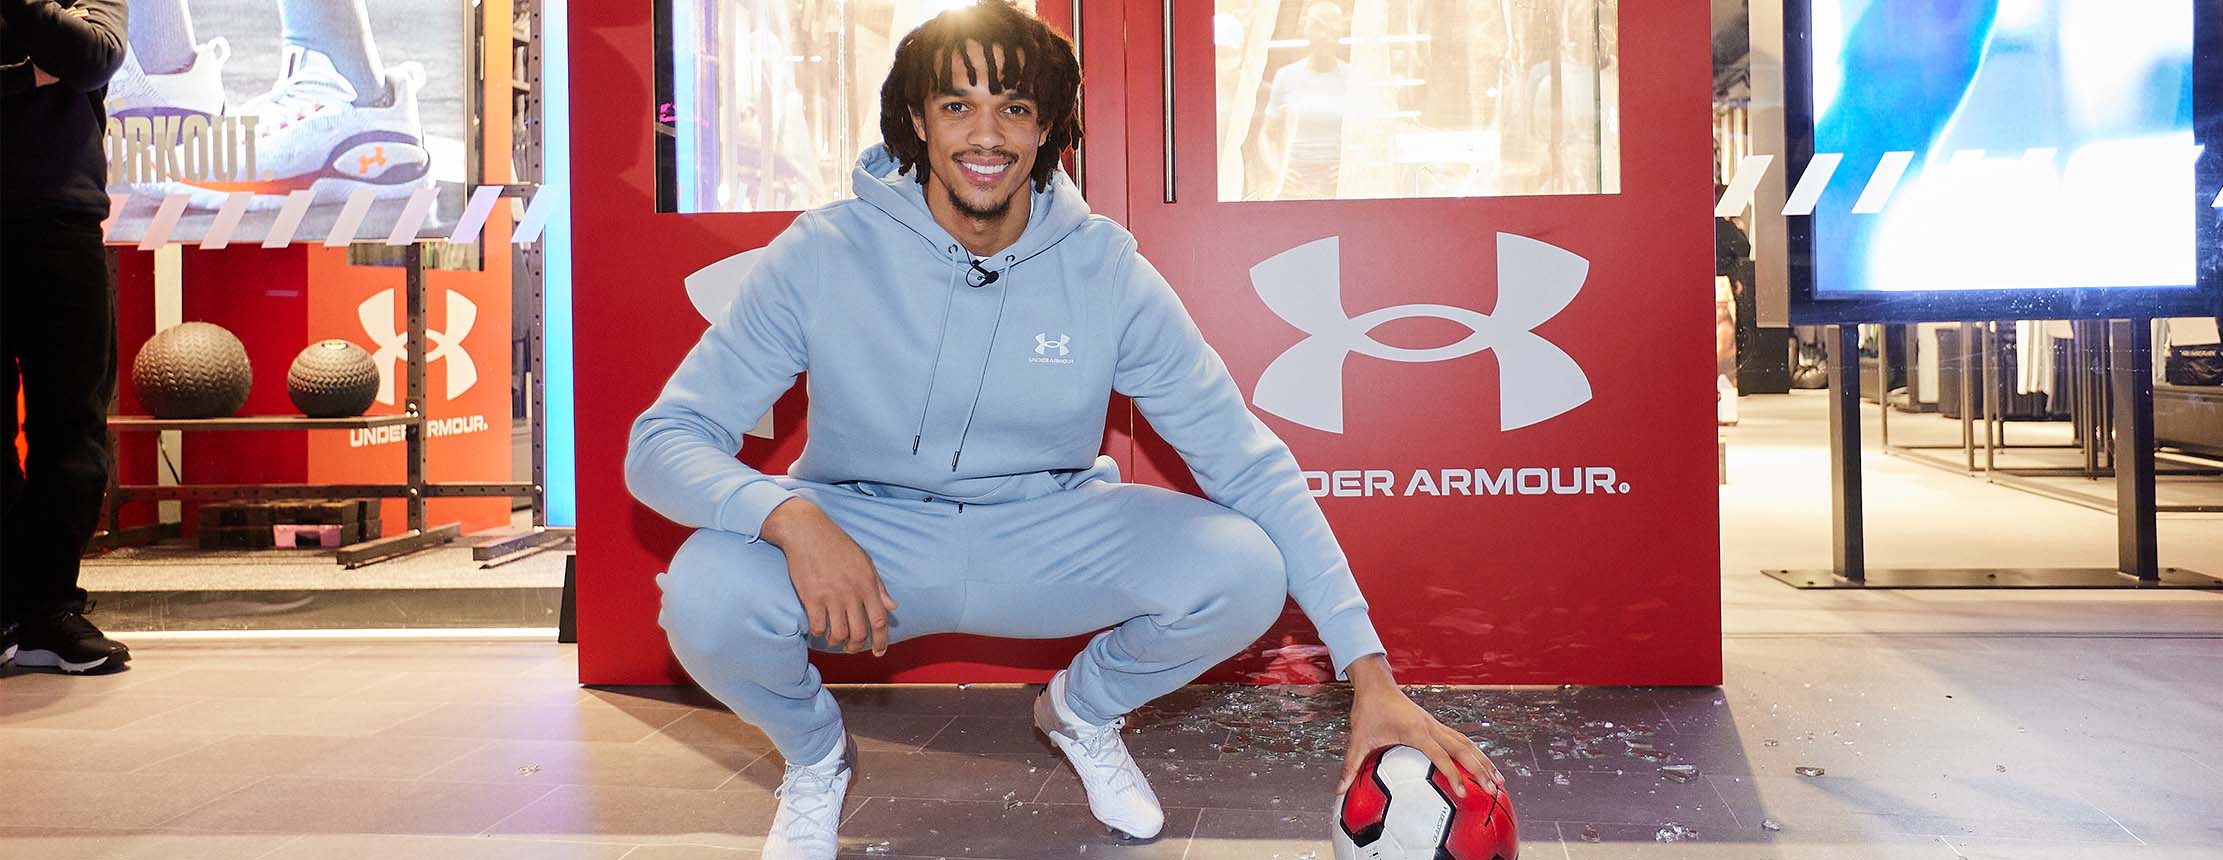 Trent alexander-arnold smashes open new under armour brand house in liverpool